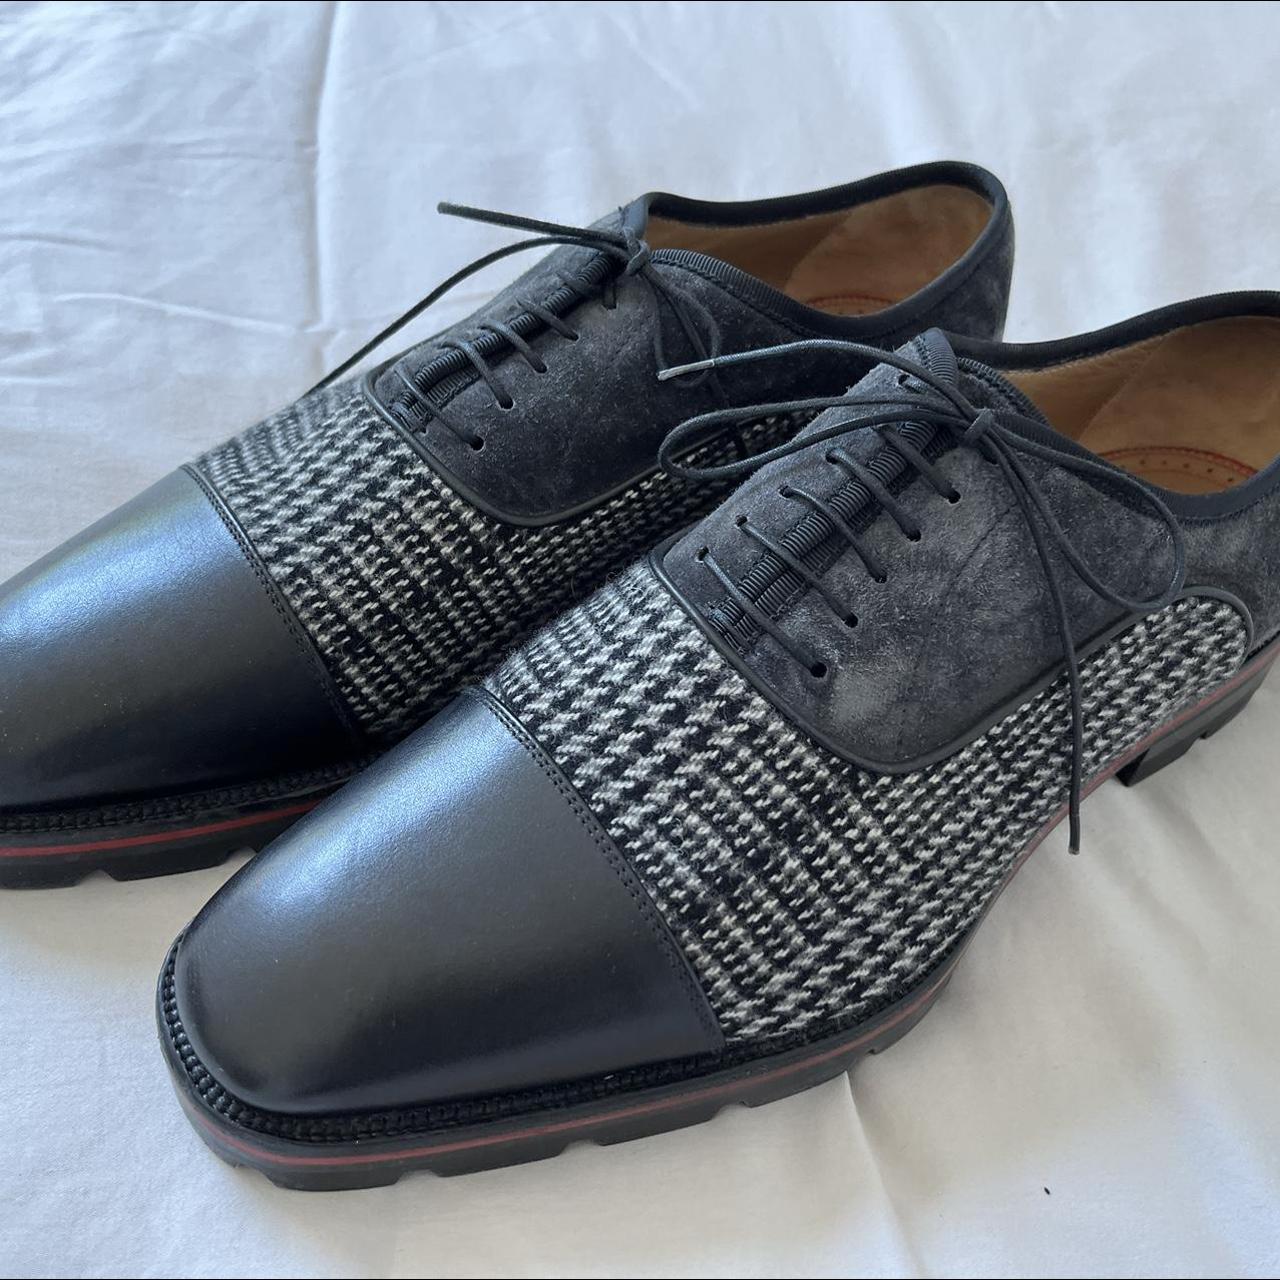 Size 9 Christian Louboutin dress shoes made in